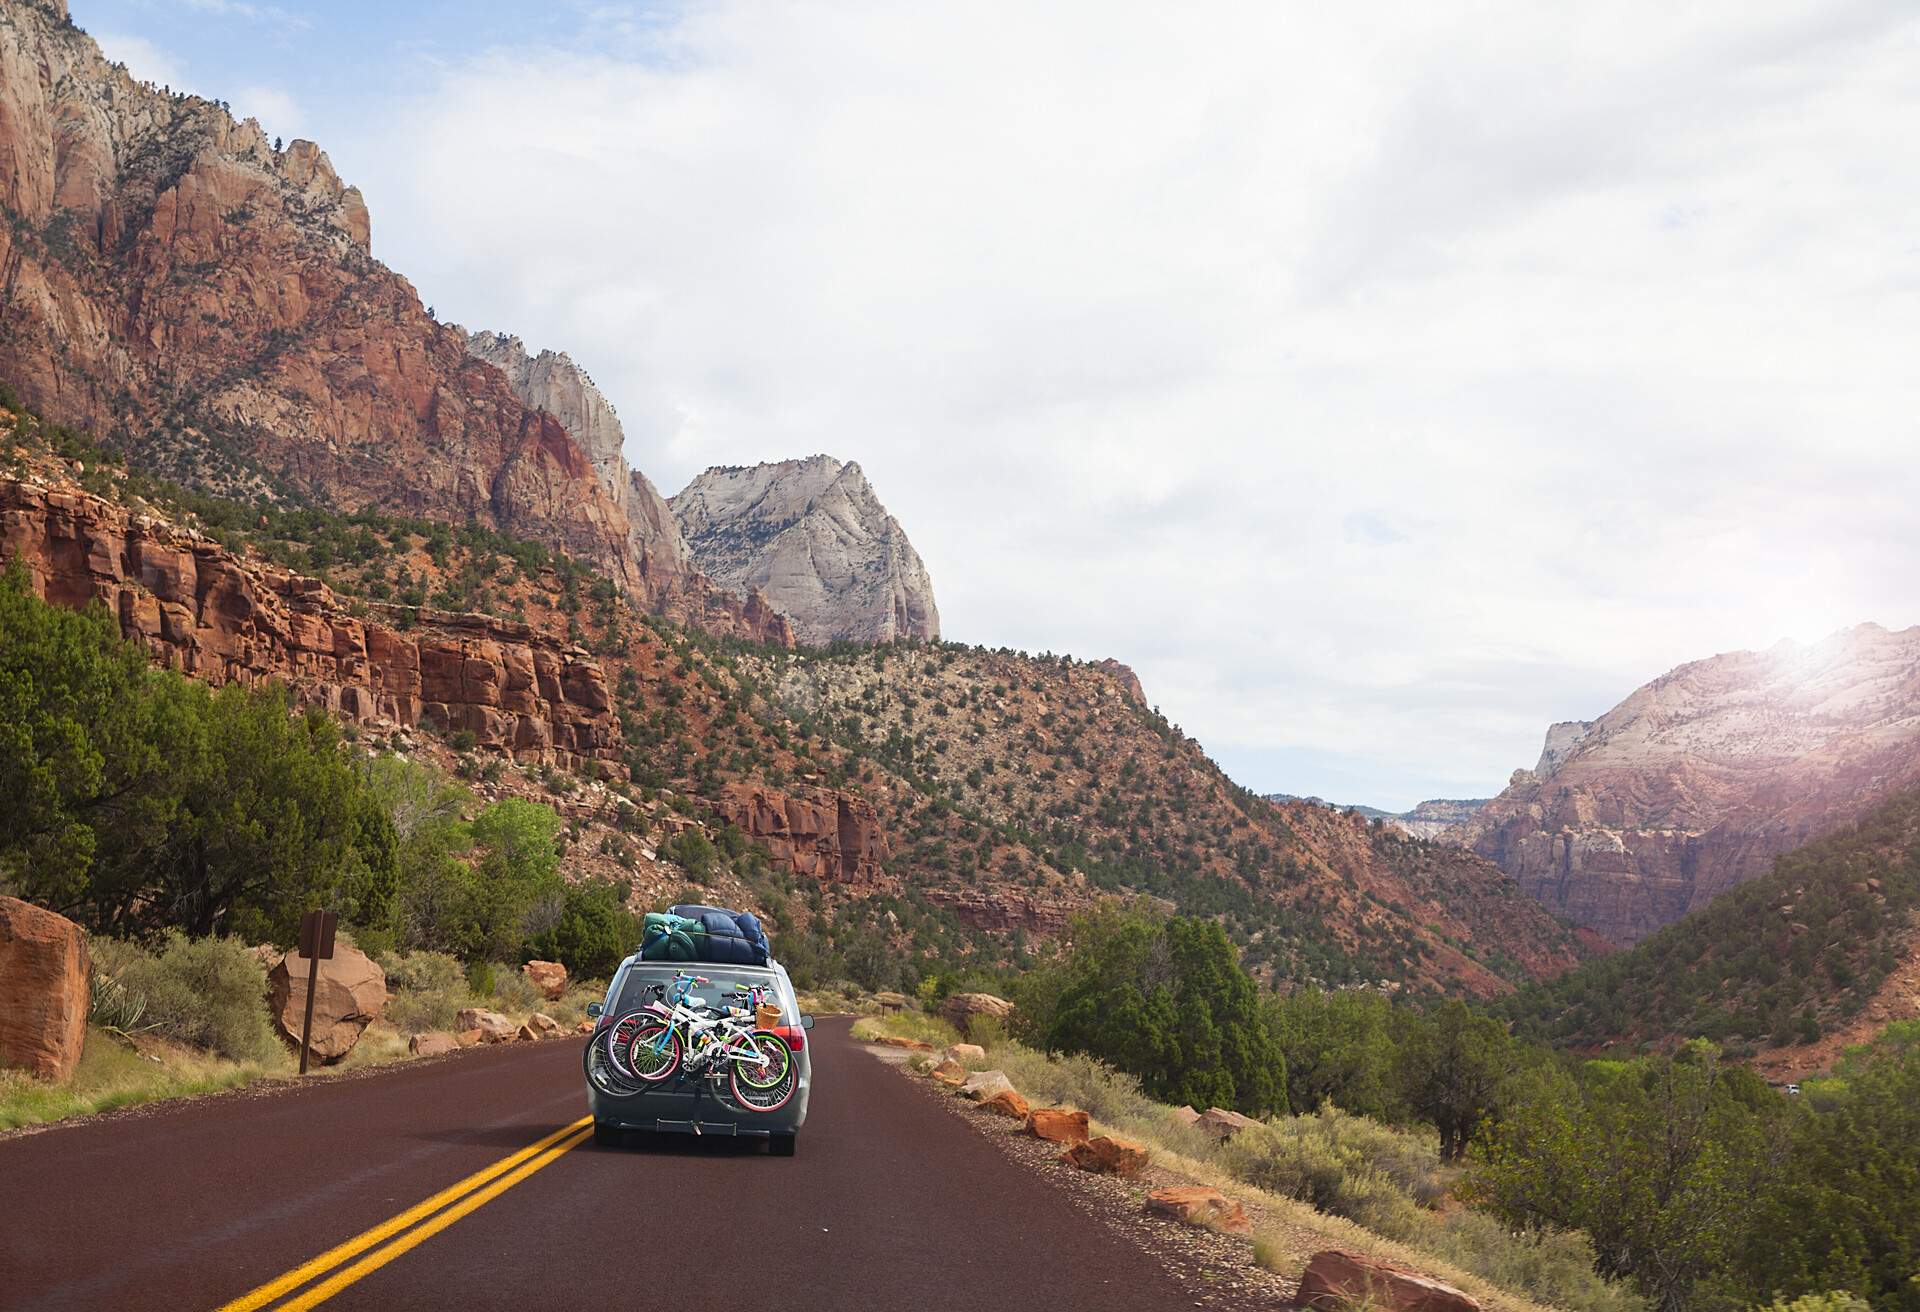 dest_usa_utah_theme_car_driving_mountains_roadtrip-gettyimages-586199646_universal_within-usage-period_77878